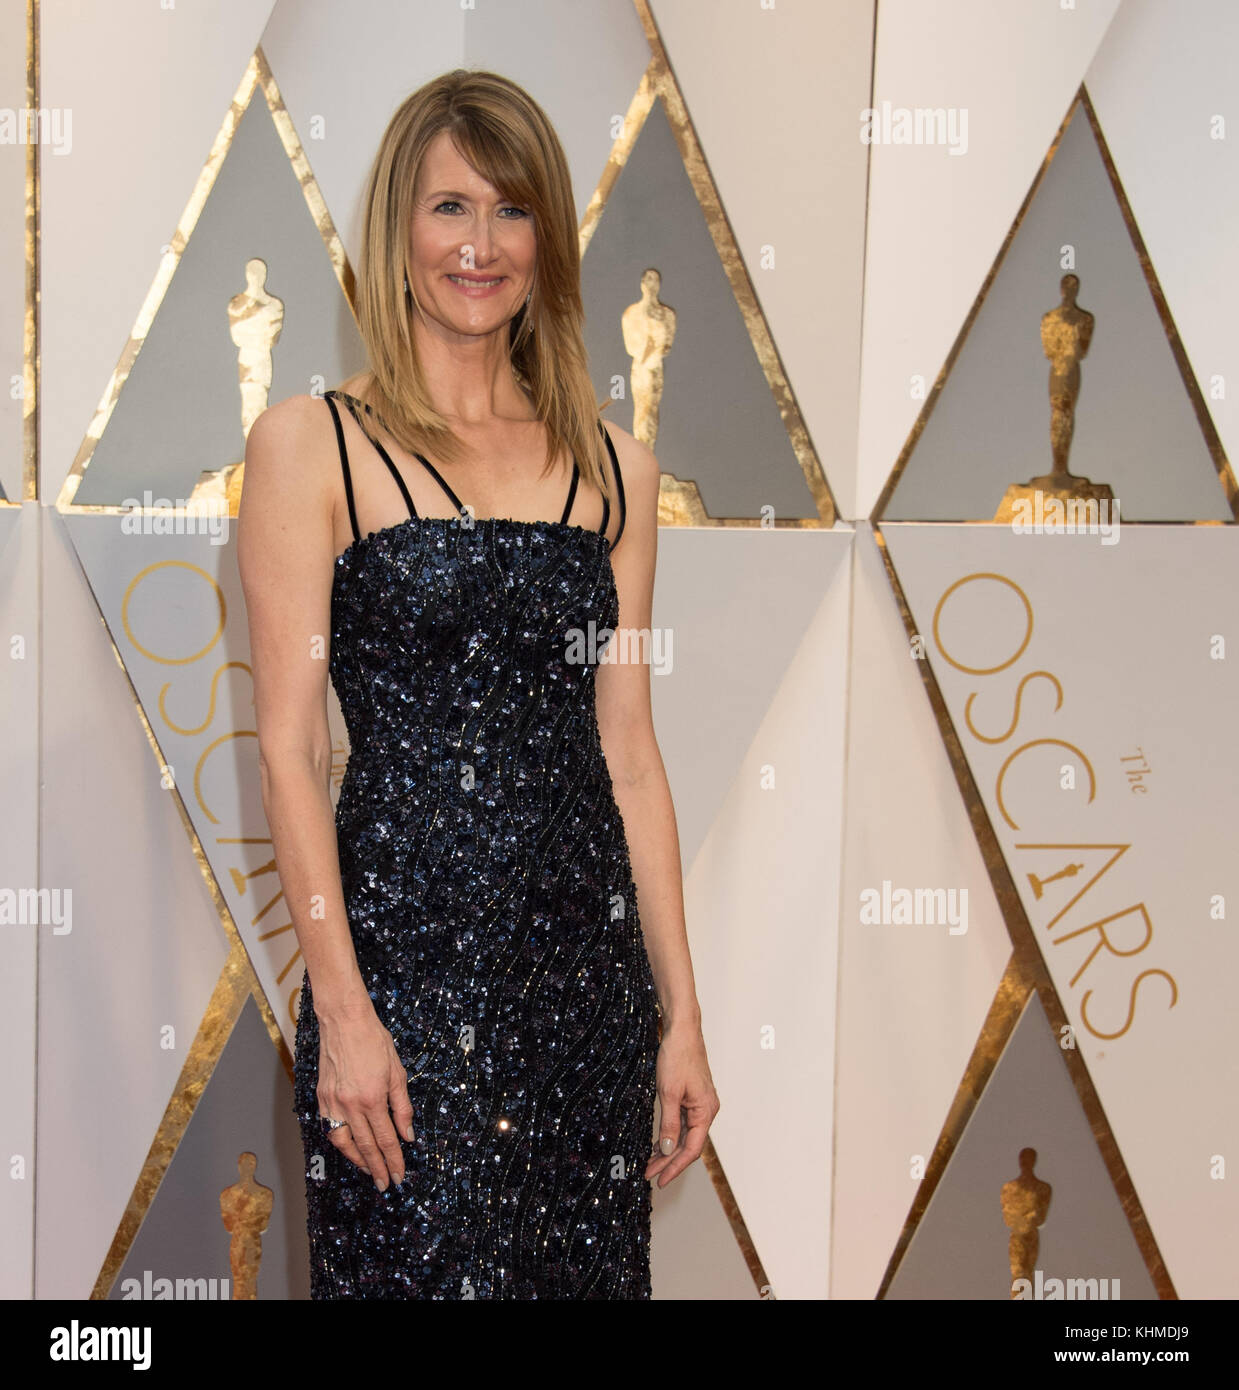 HOLLYWOOD, CA - FEBRUARY 26: Laura Dern attends the 89th Annual Academy Awards at Hollywood & Highland Center on February 26, 2017 in Hollywood, California  People:  Laura Dern  Transmission Ref:  MNC Stock Photo